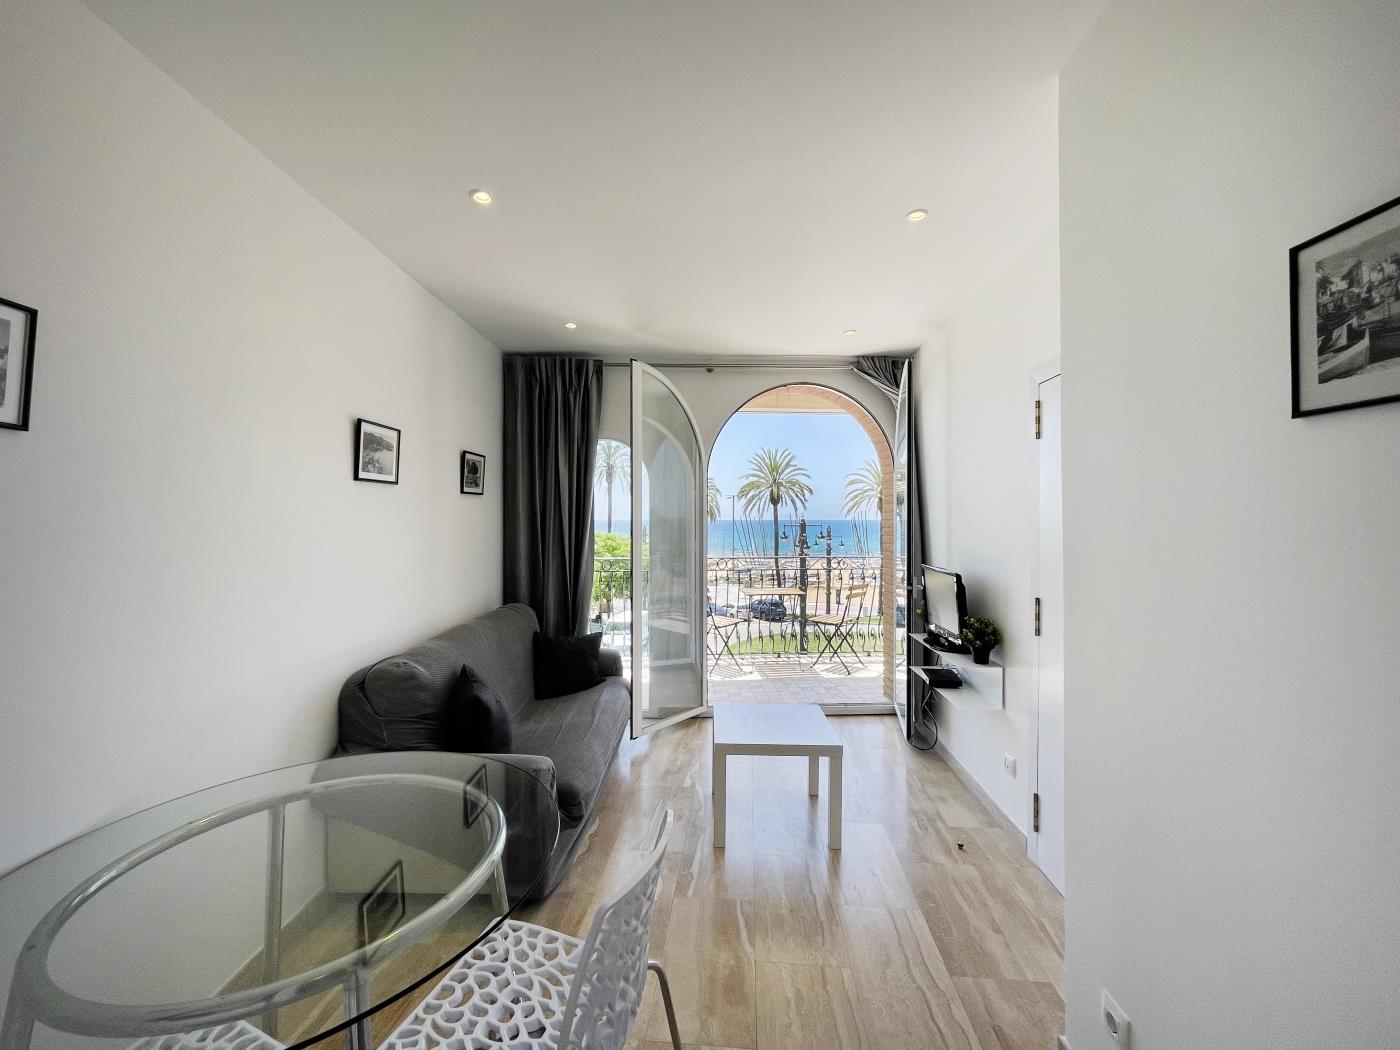 RIBERA PETIT BY BLAUSITGES Small apartment with superb sea views in Sitges. in SITGES